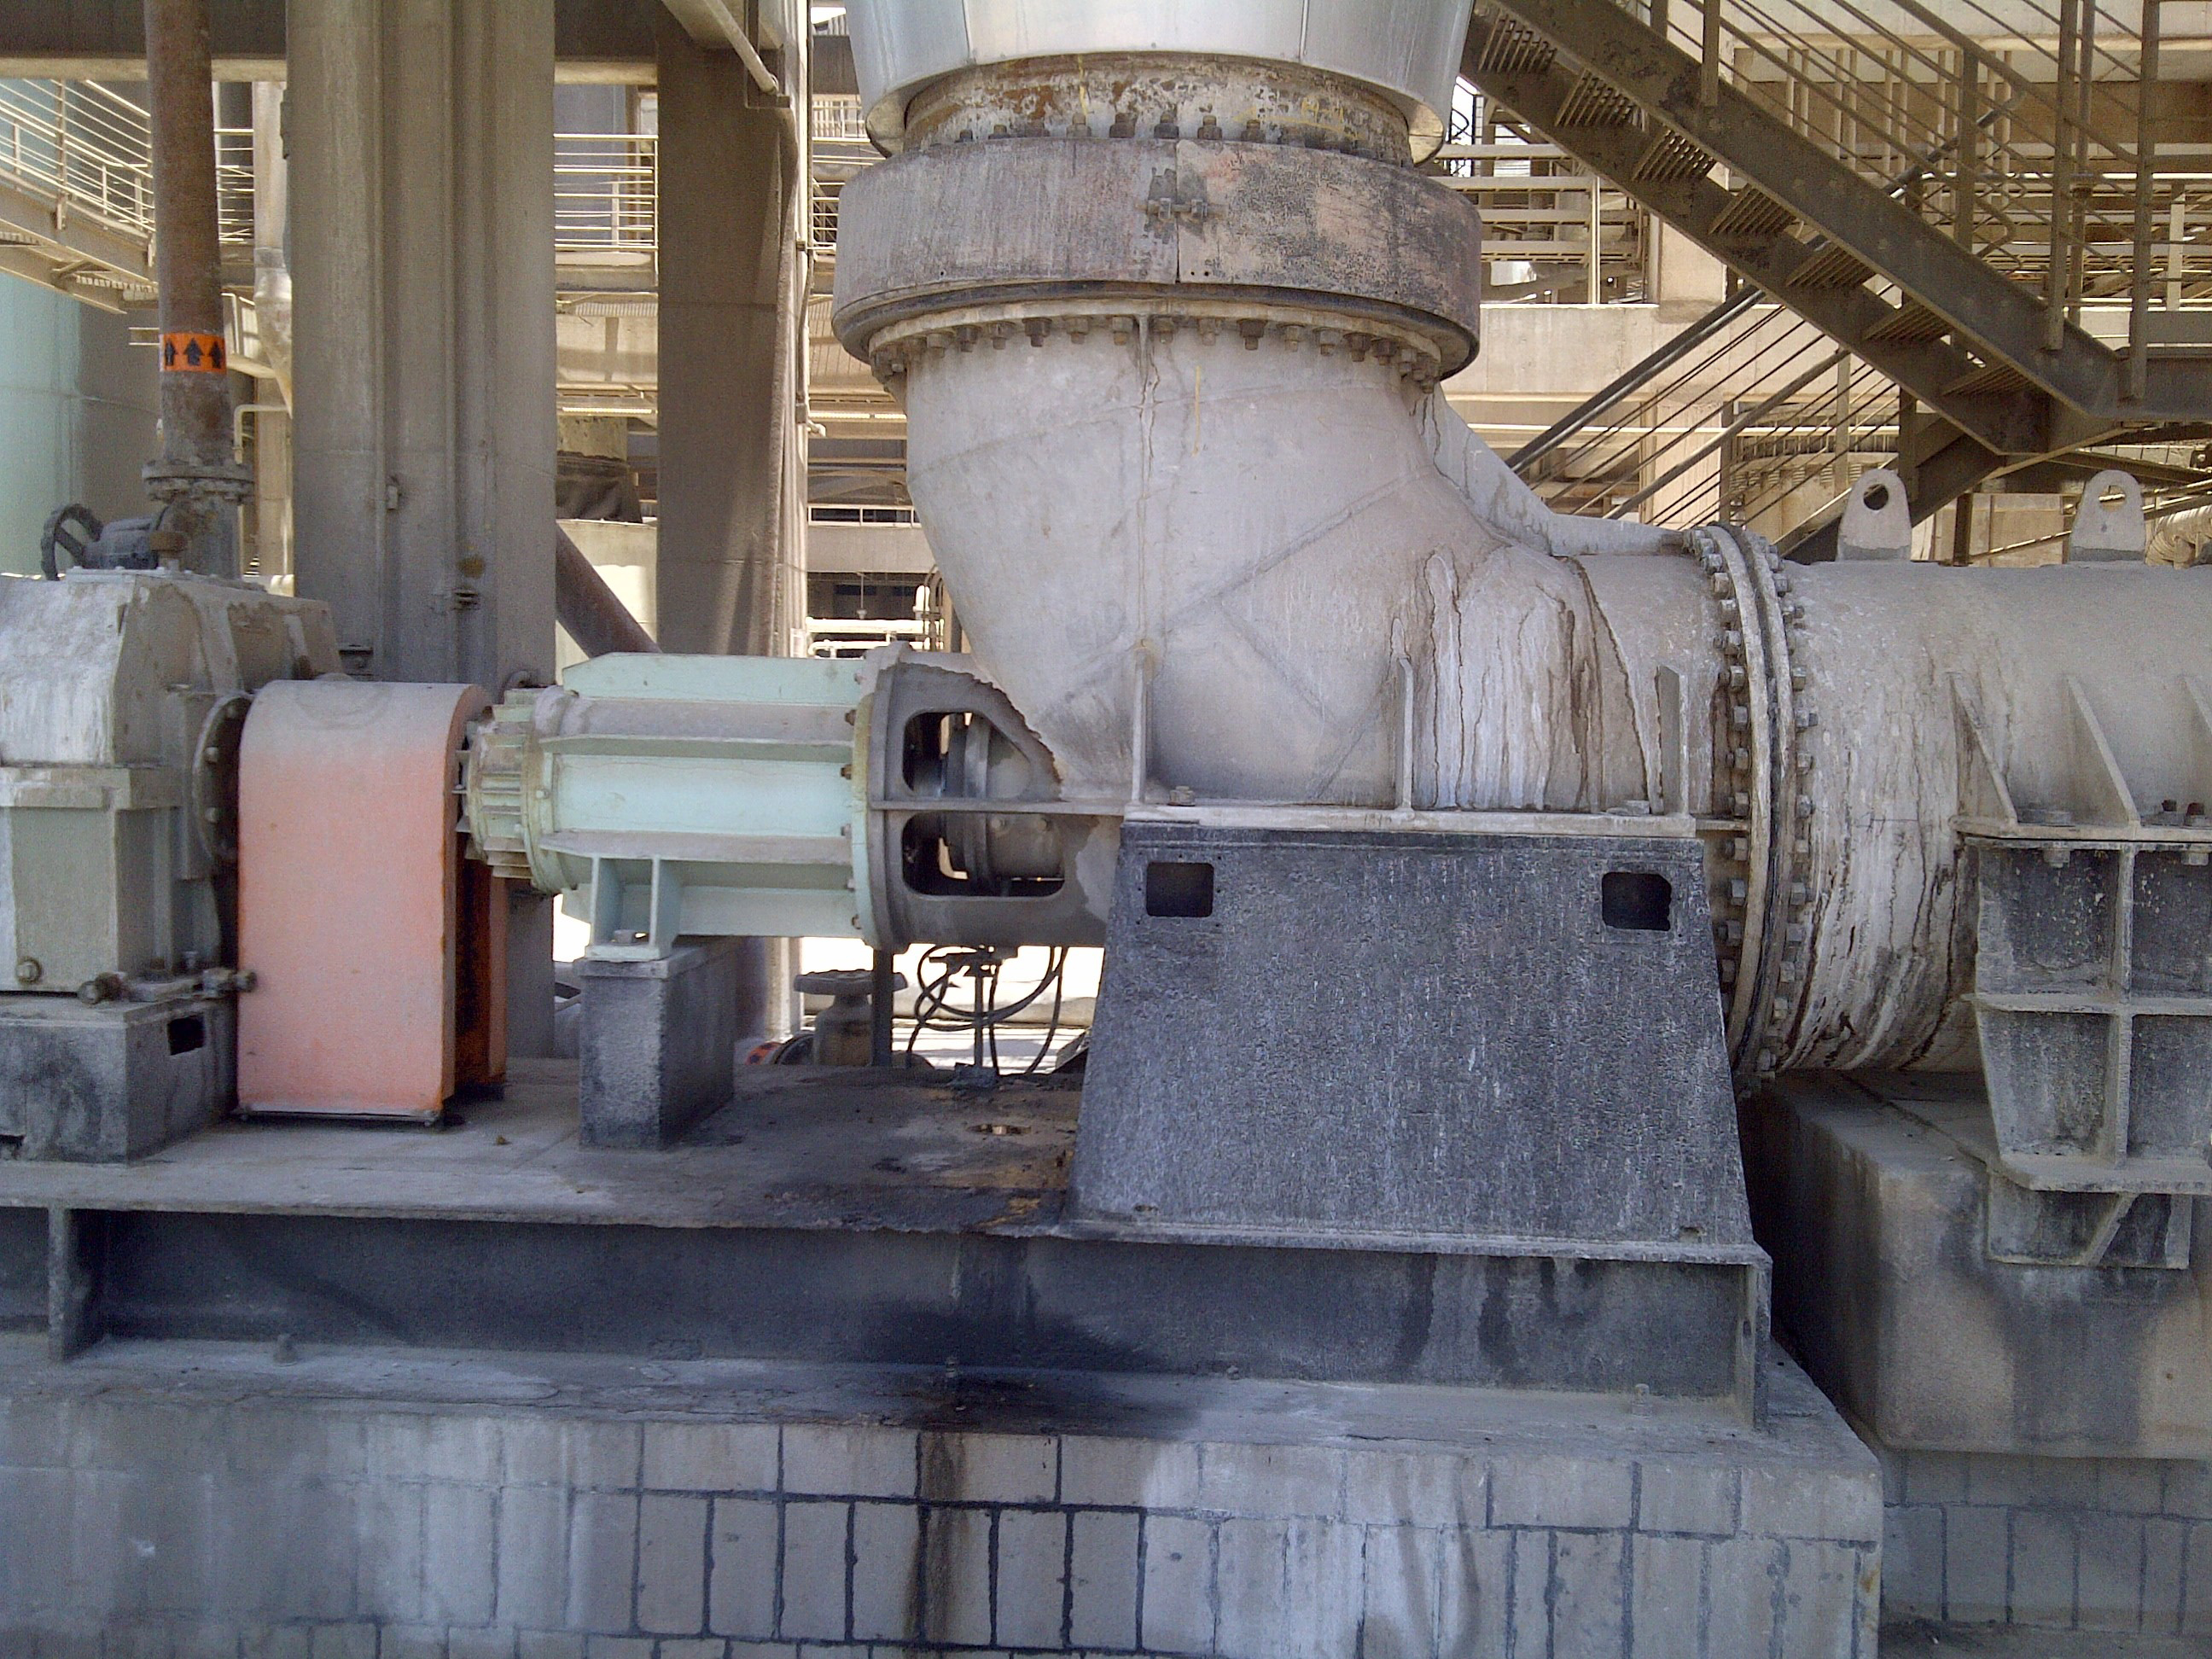 Axial flow pump type CAHR1000F running at the site.